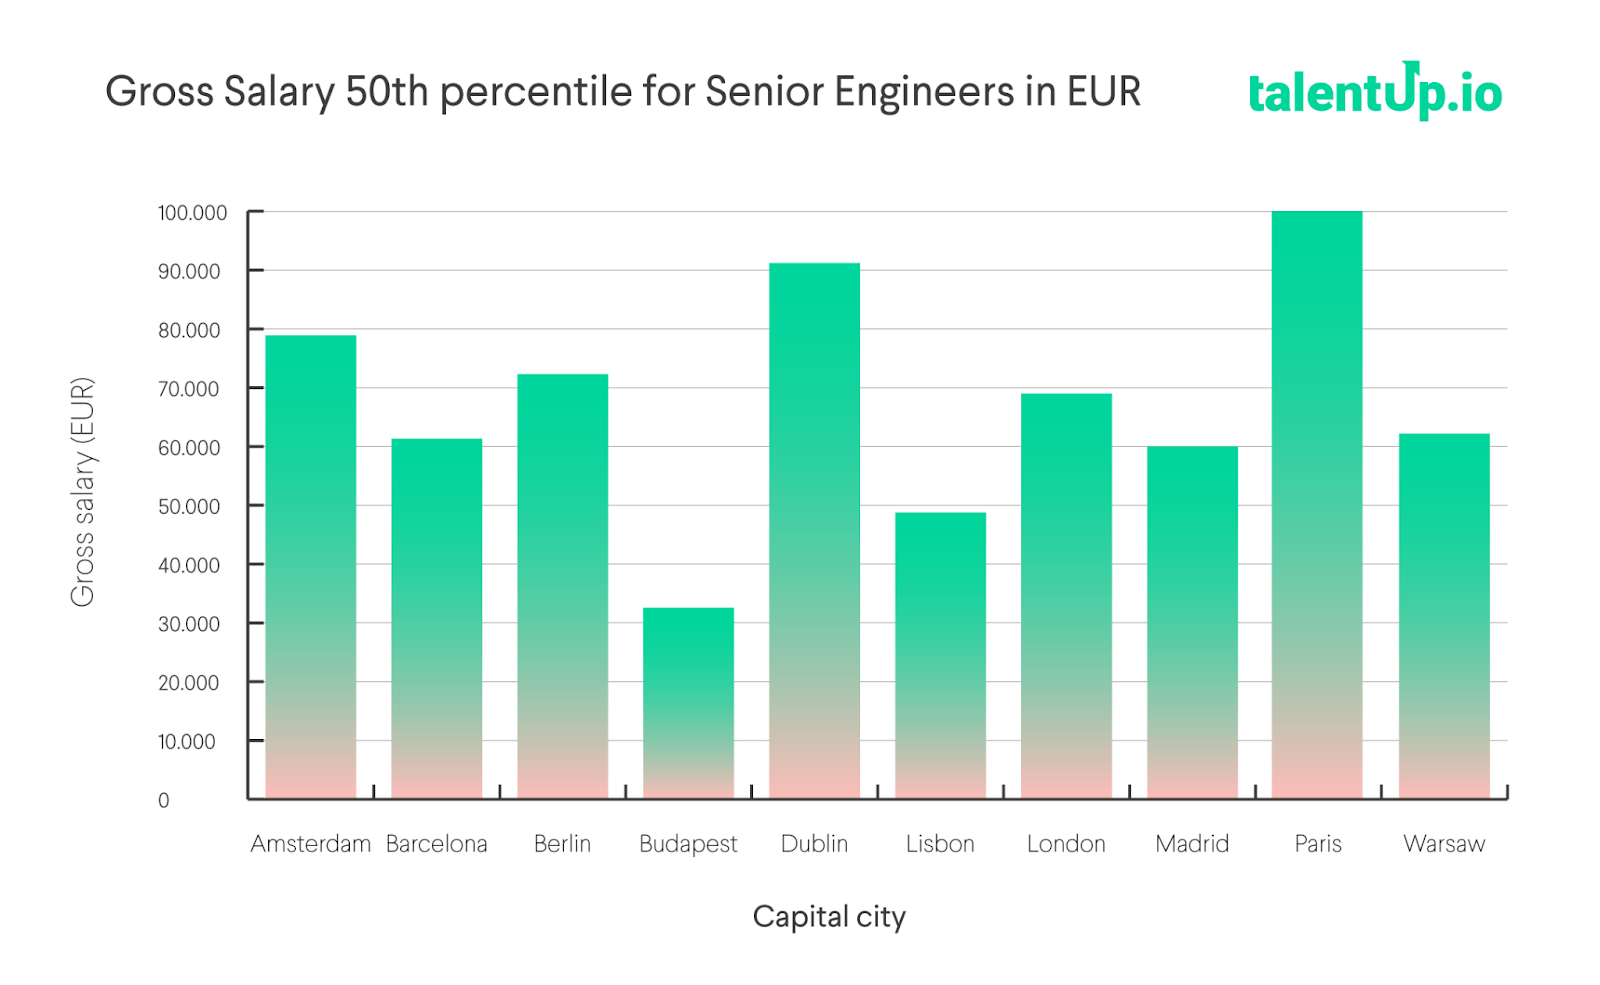 Gross Salary 50th percentile for Senior Engineers in EUR.